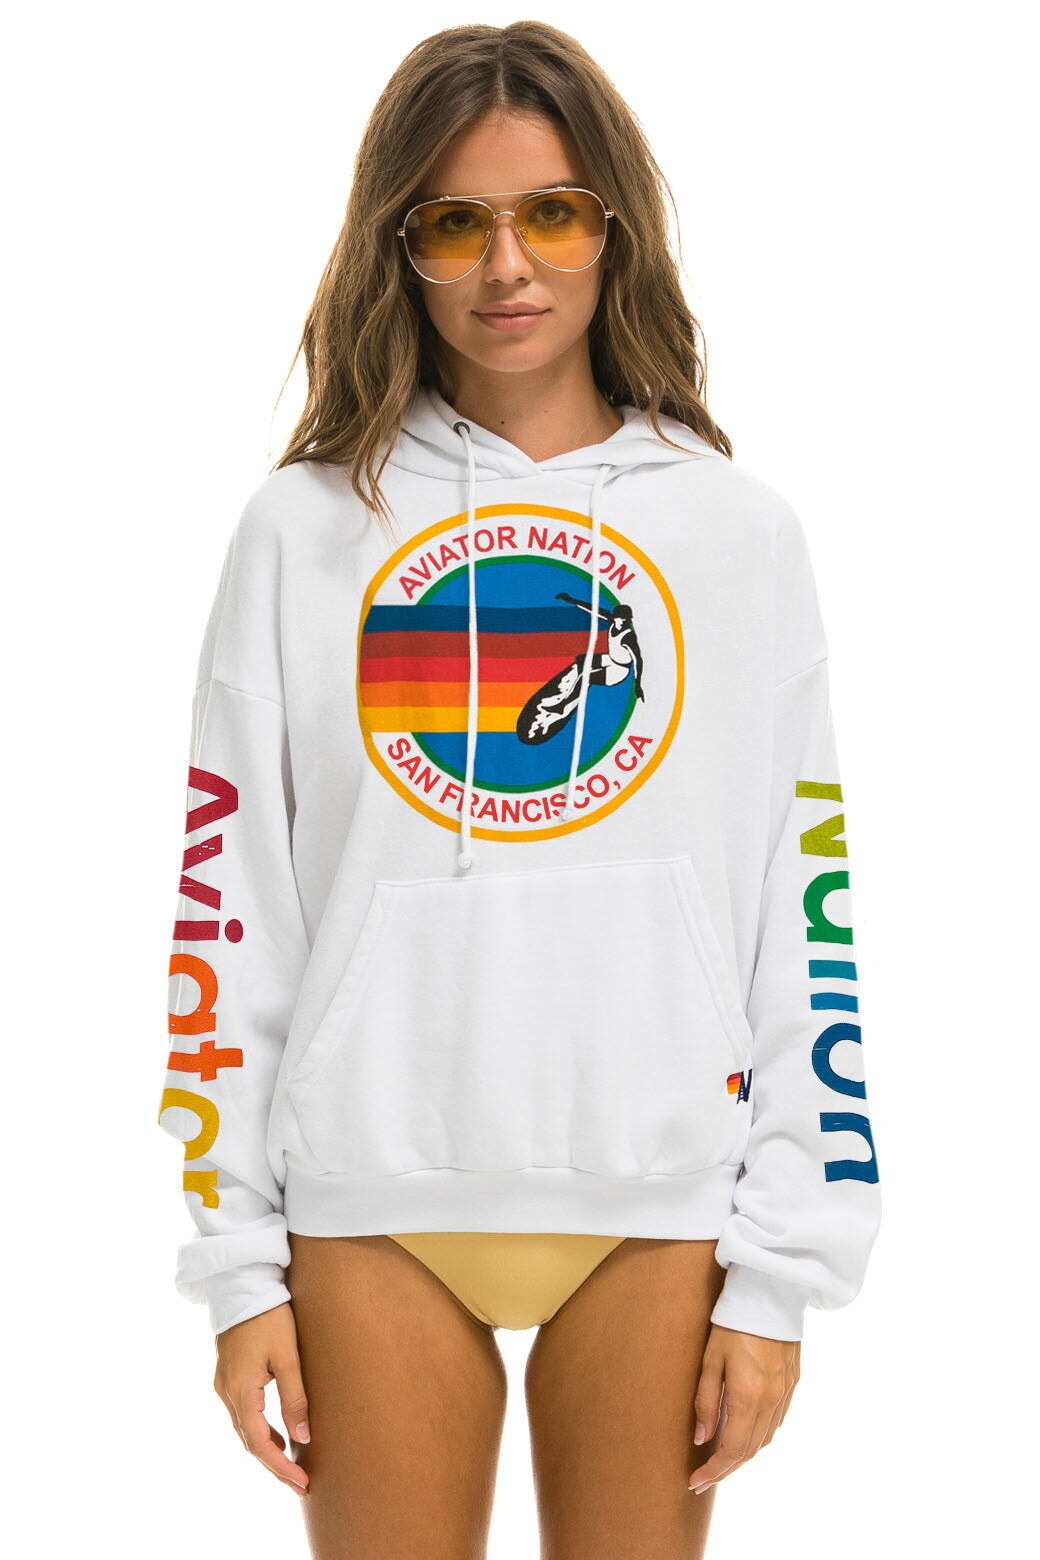 AVIATOR NATION SAN FRANCISCO RELAXED PULLOVER HOODIE - WHITE Hoodie Aviator Nation 